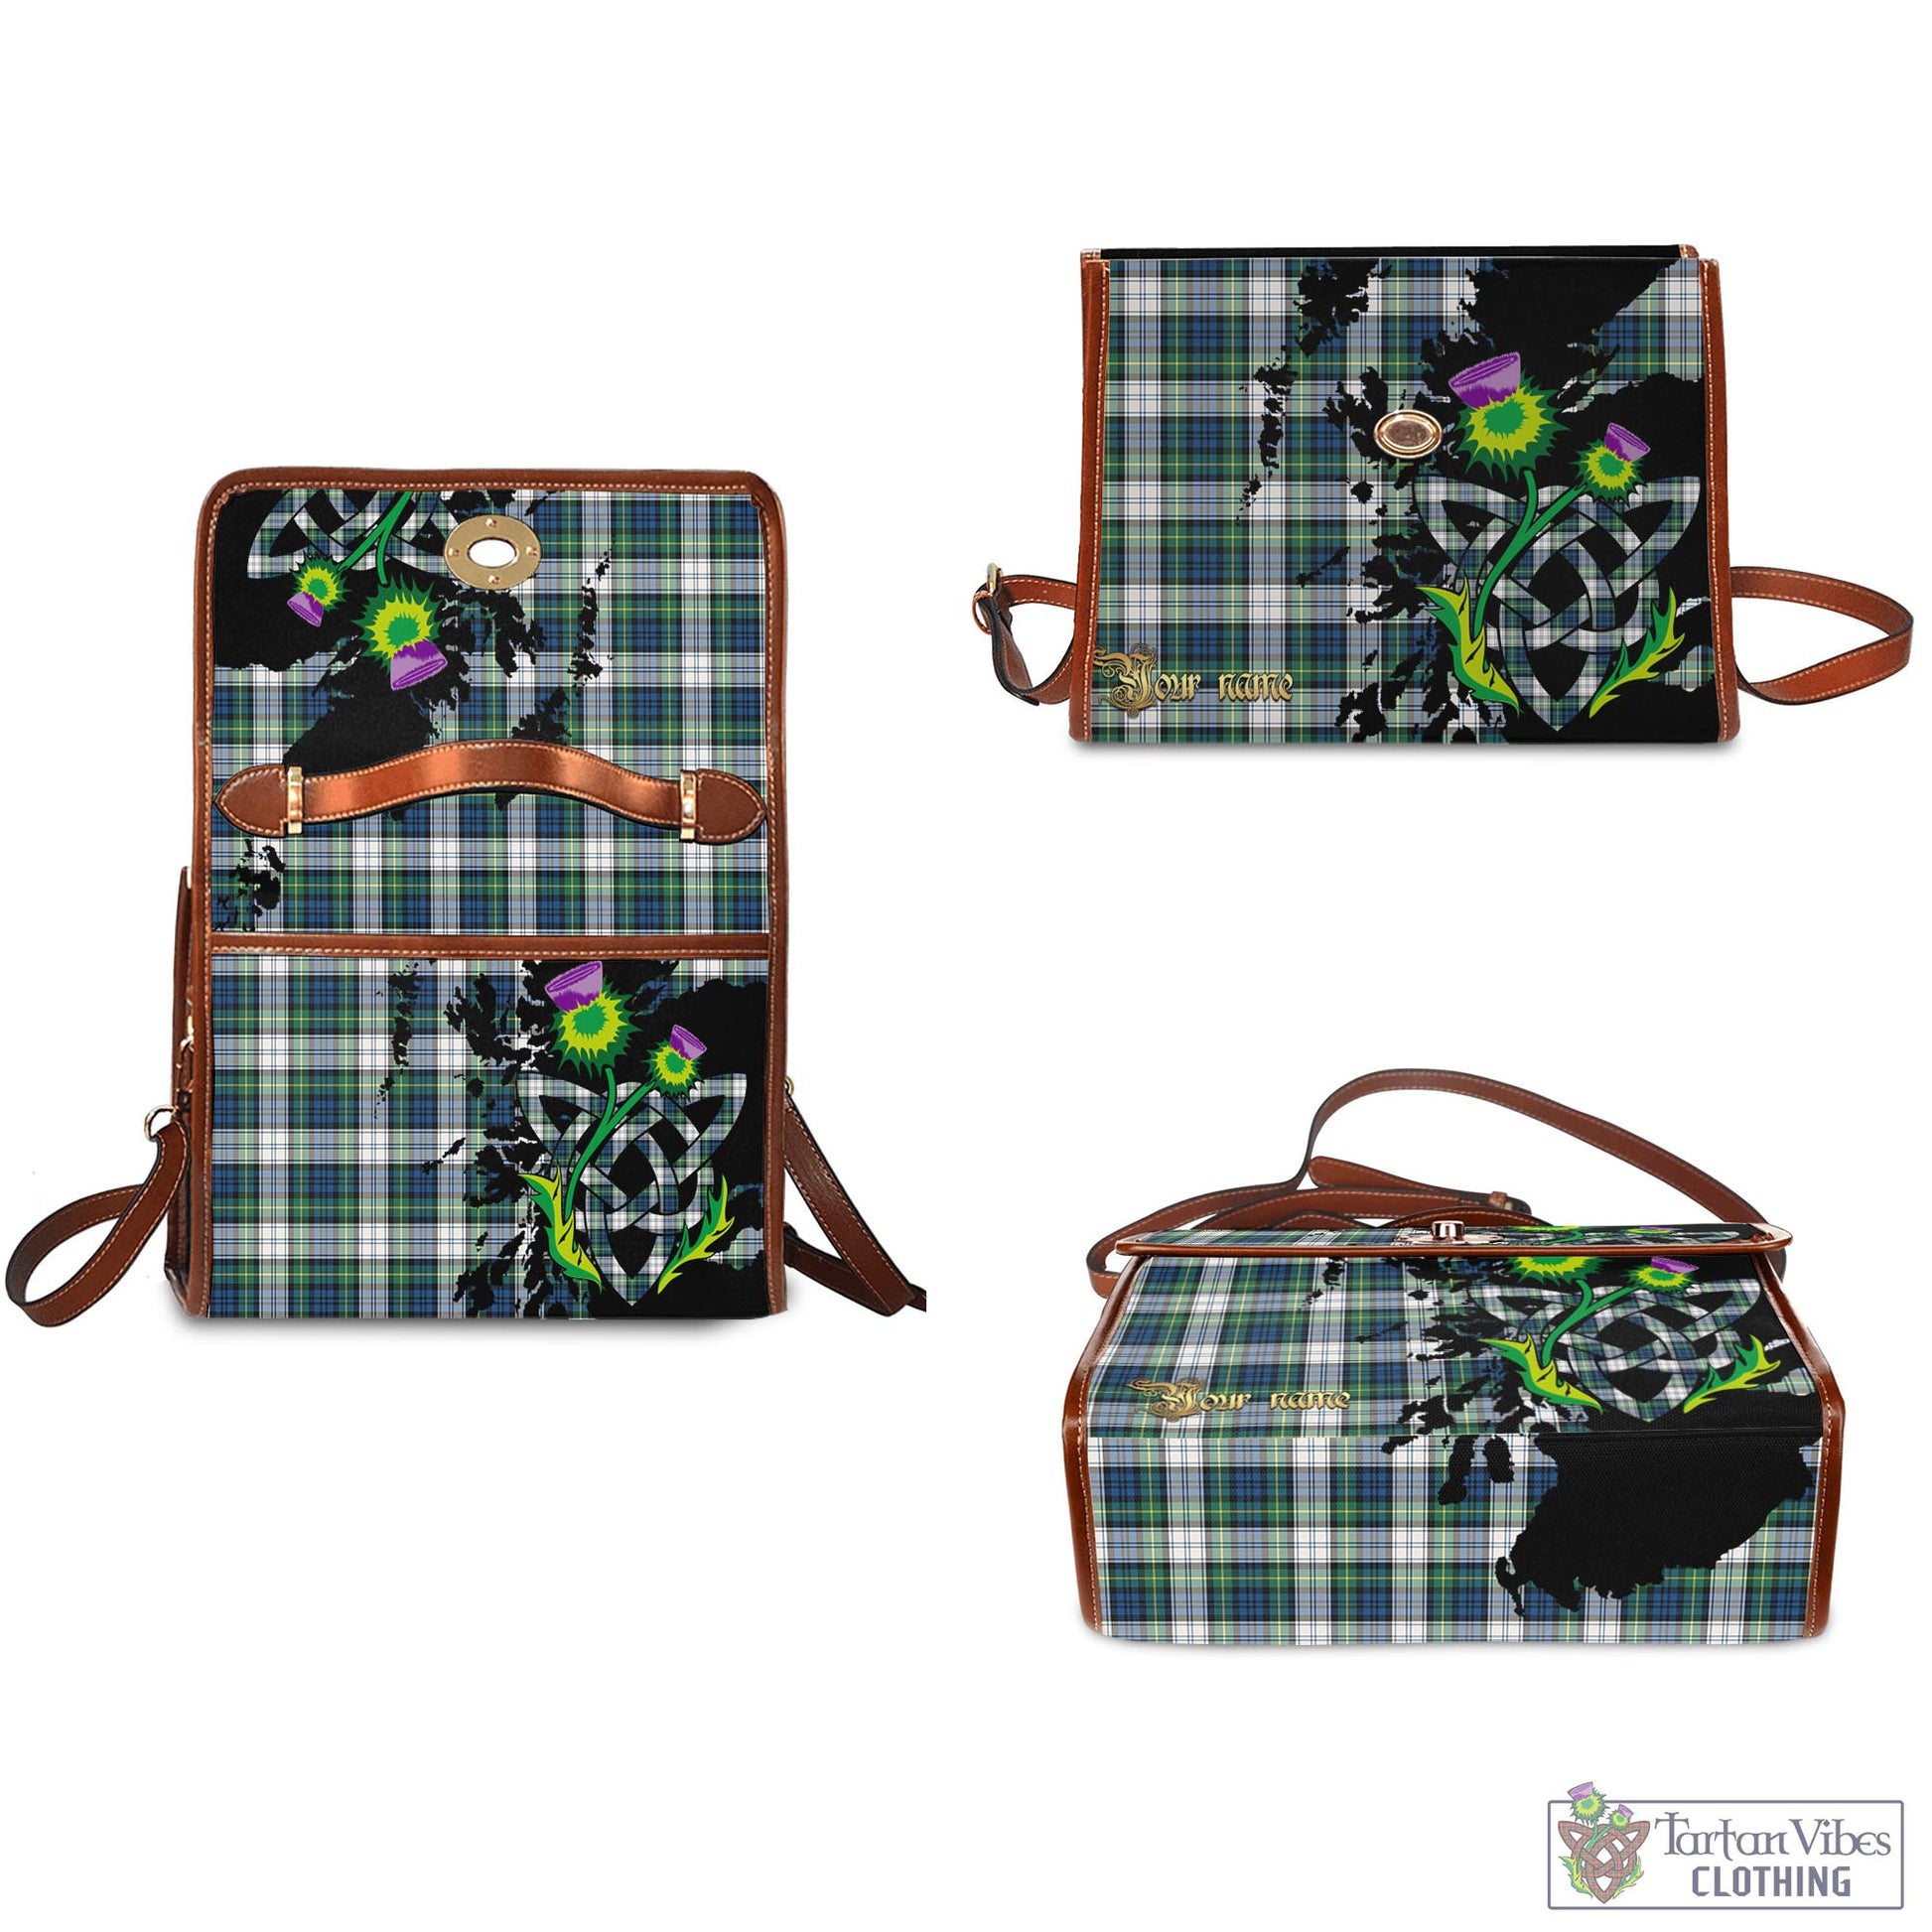 Tartan Vibes Clothing Gordon Dress Ancient Tartan Waterproof Canvas Bag with Scotland Map and Thistle Celtic Accents